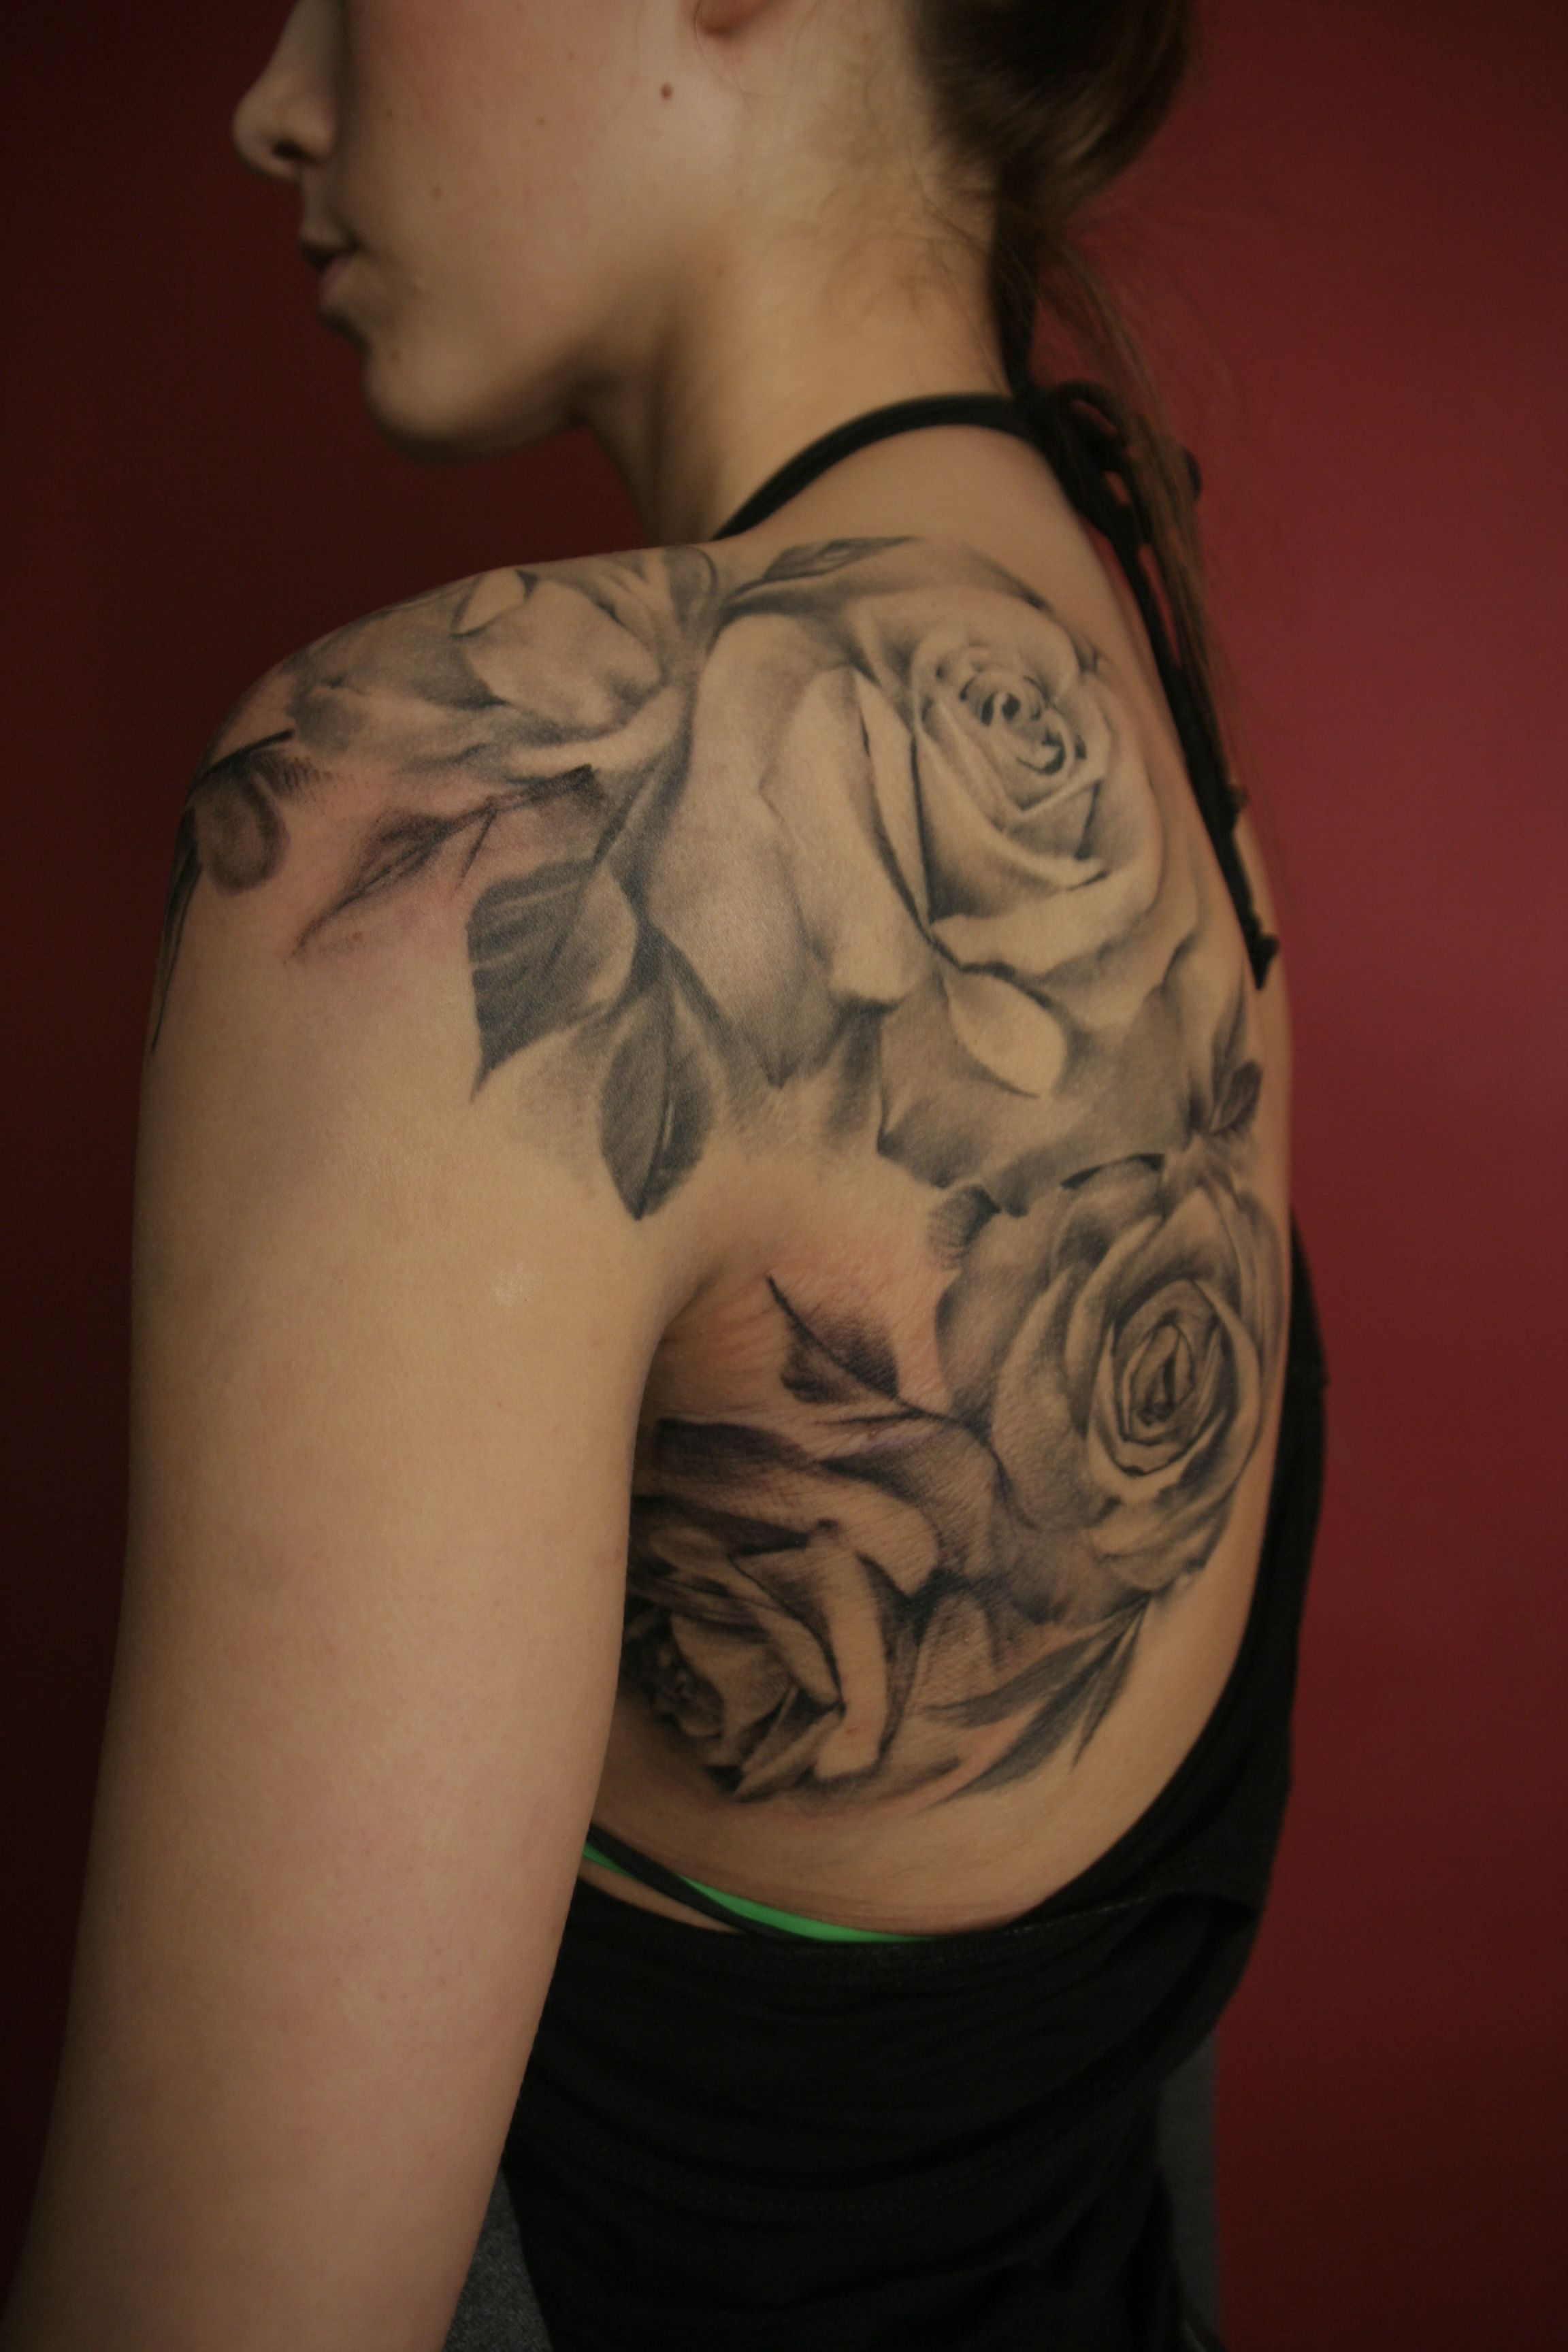 New Design Ideas Of Black Rose Flower Tattoos Tattoo Tattoos within dimensions 2304 X 3456